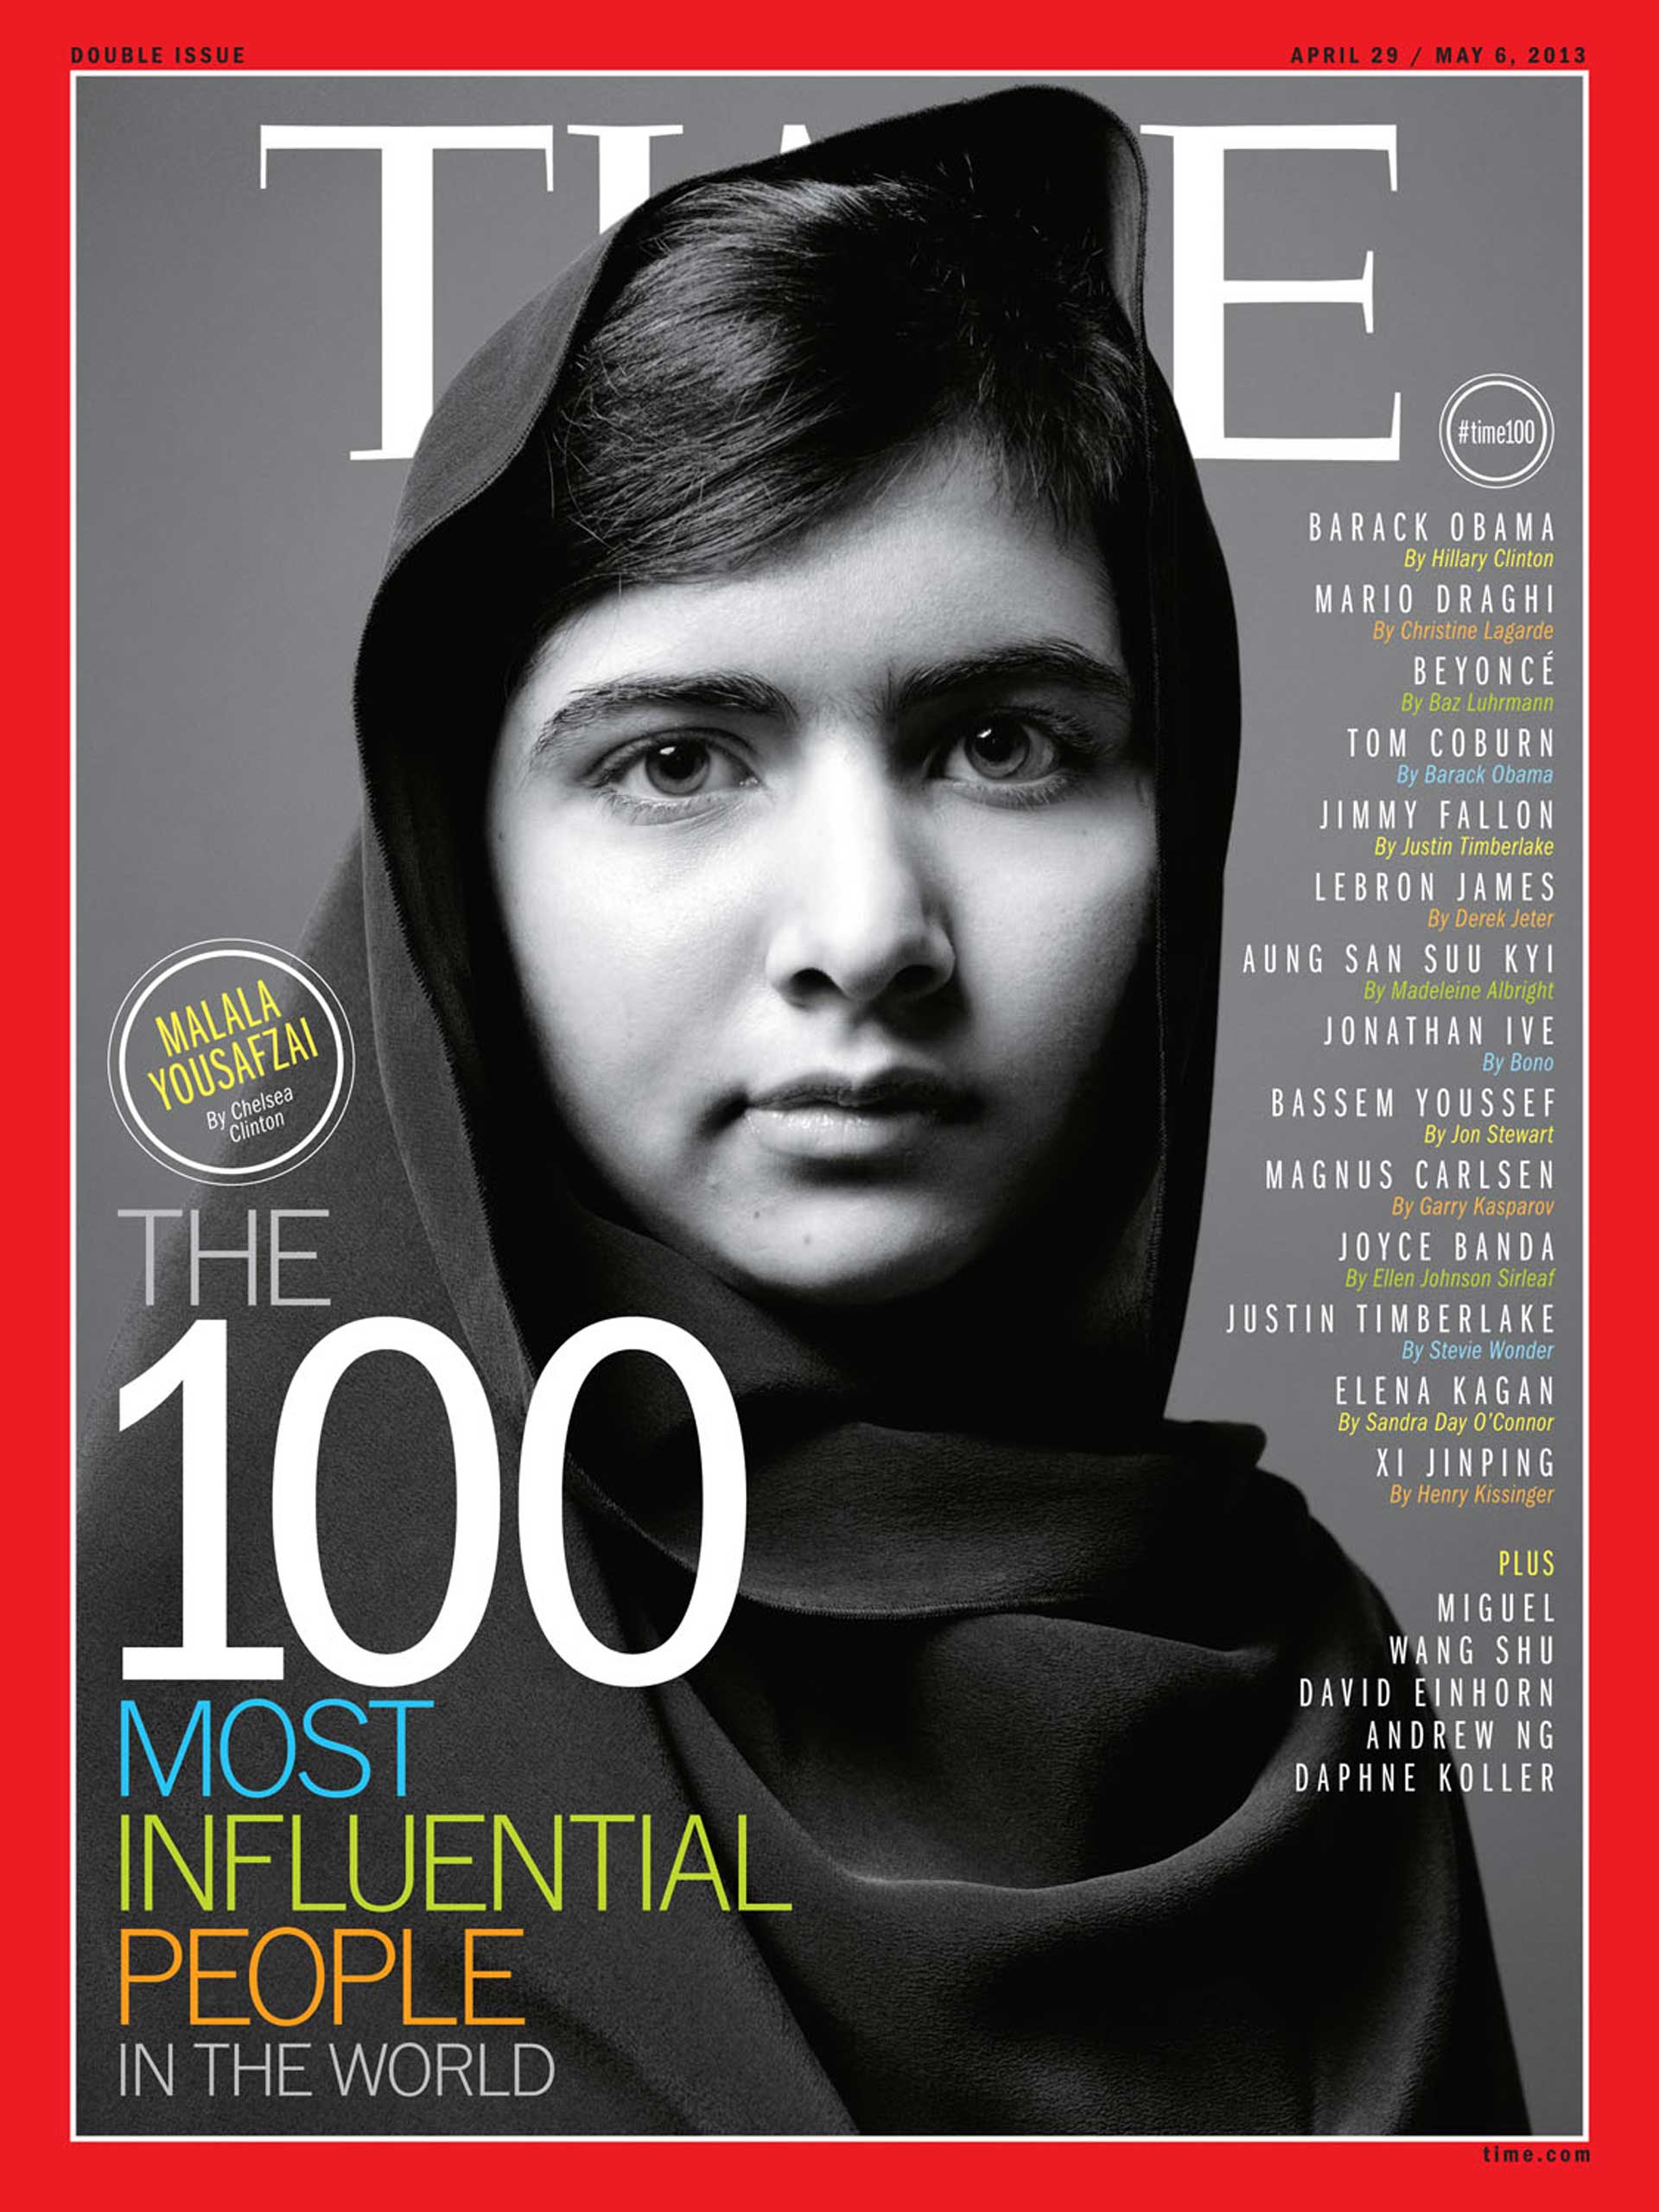 Malala Yousafzai was on the cover of TIME Magazine's 100 Most Influential People list in 2013.